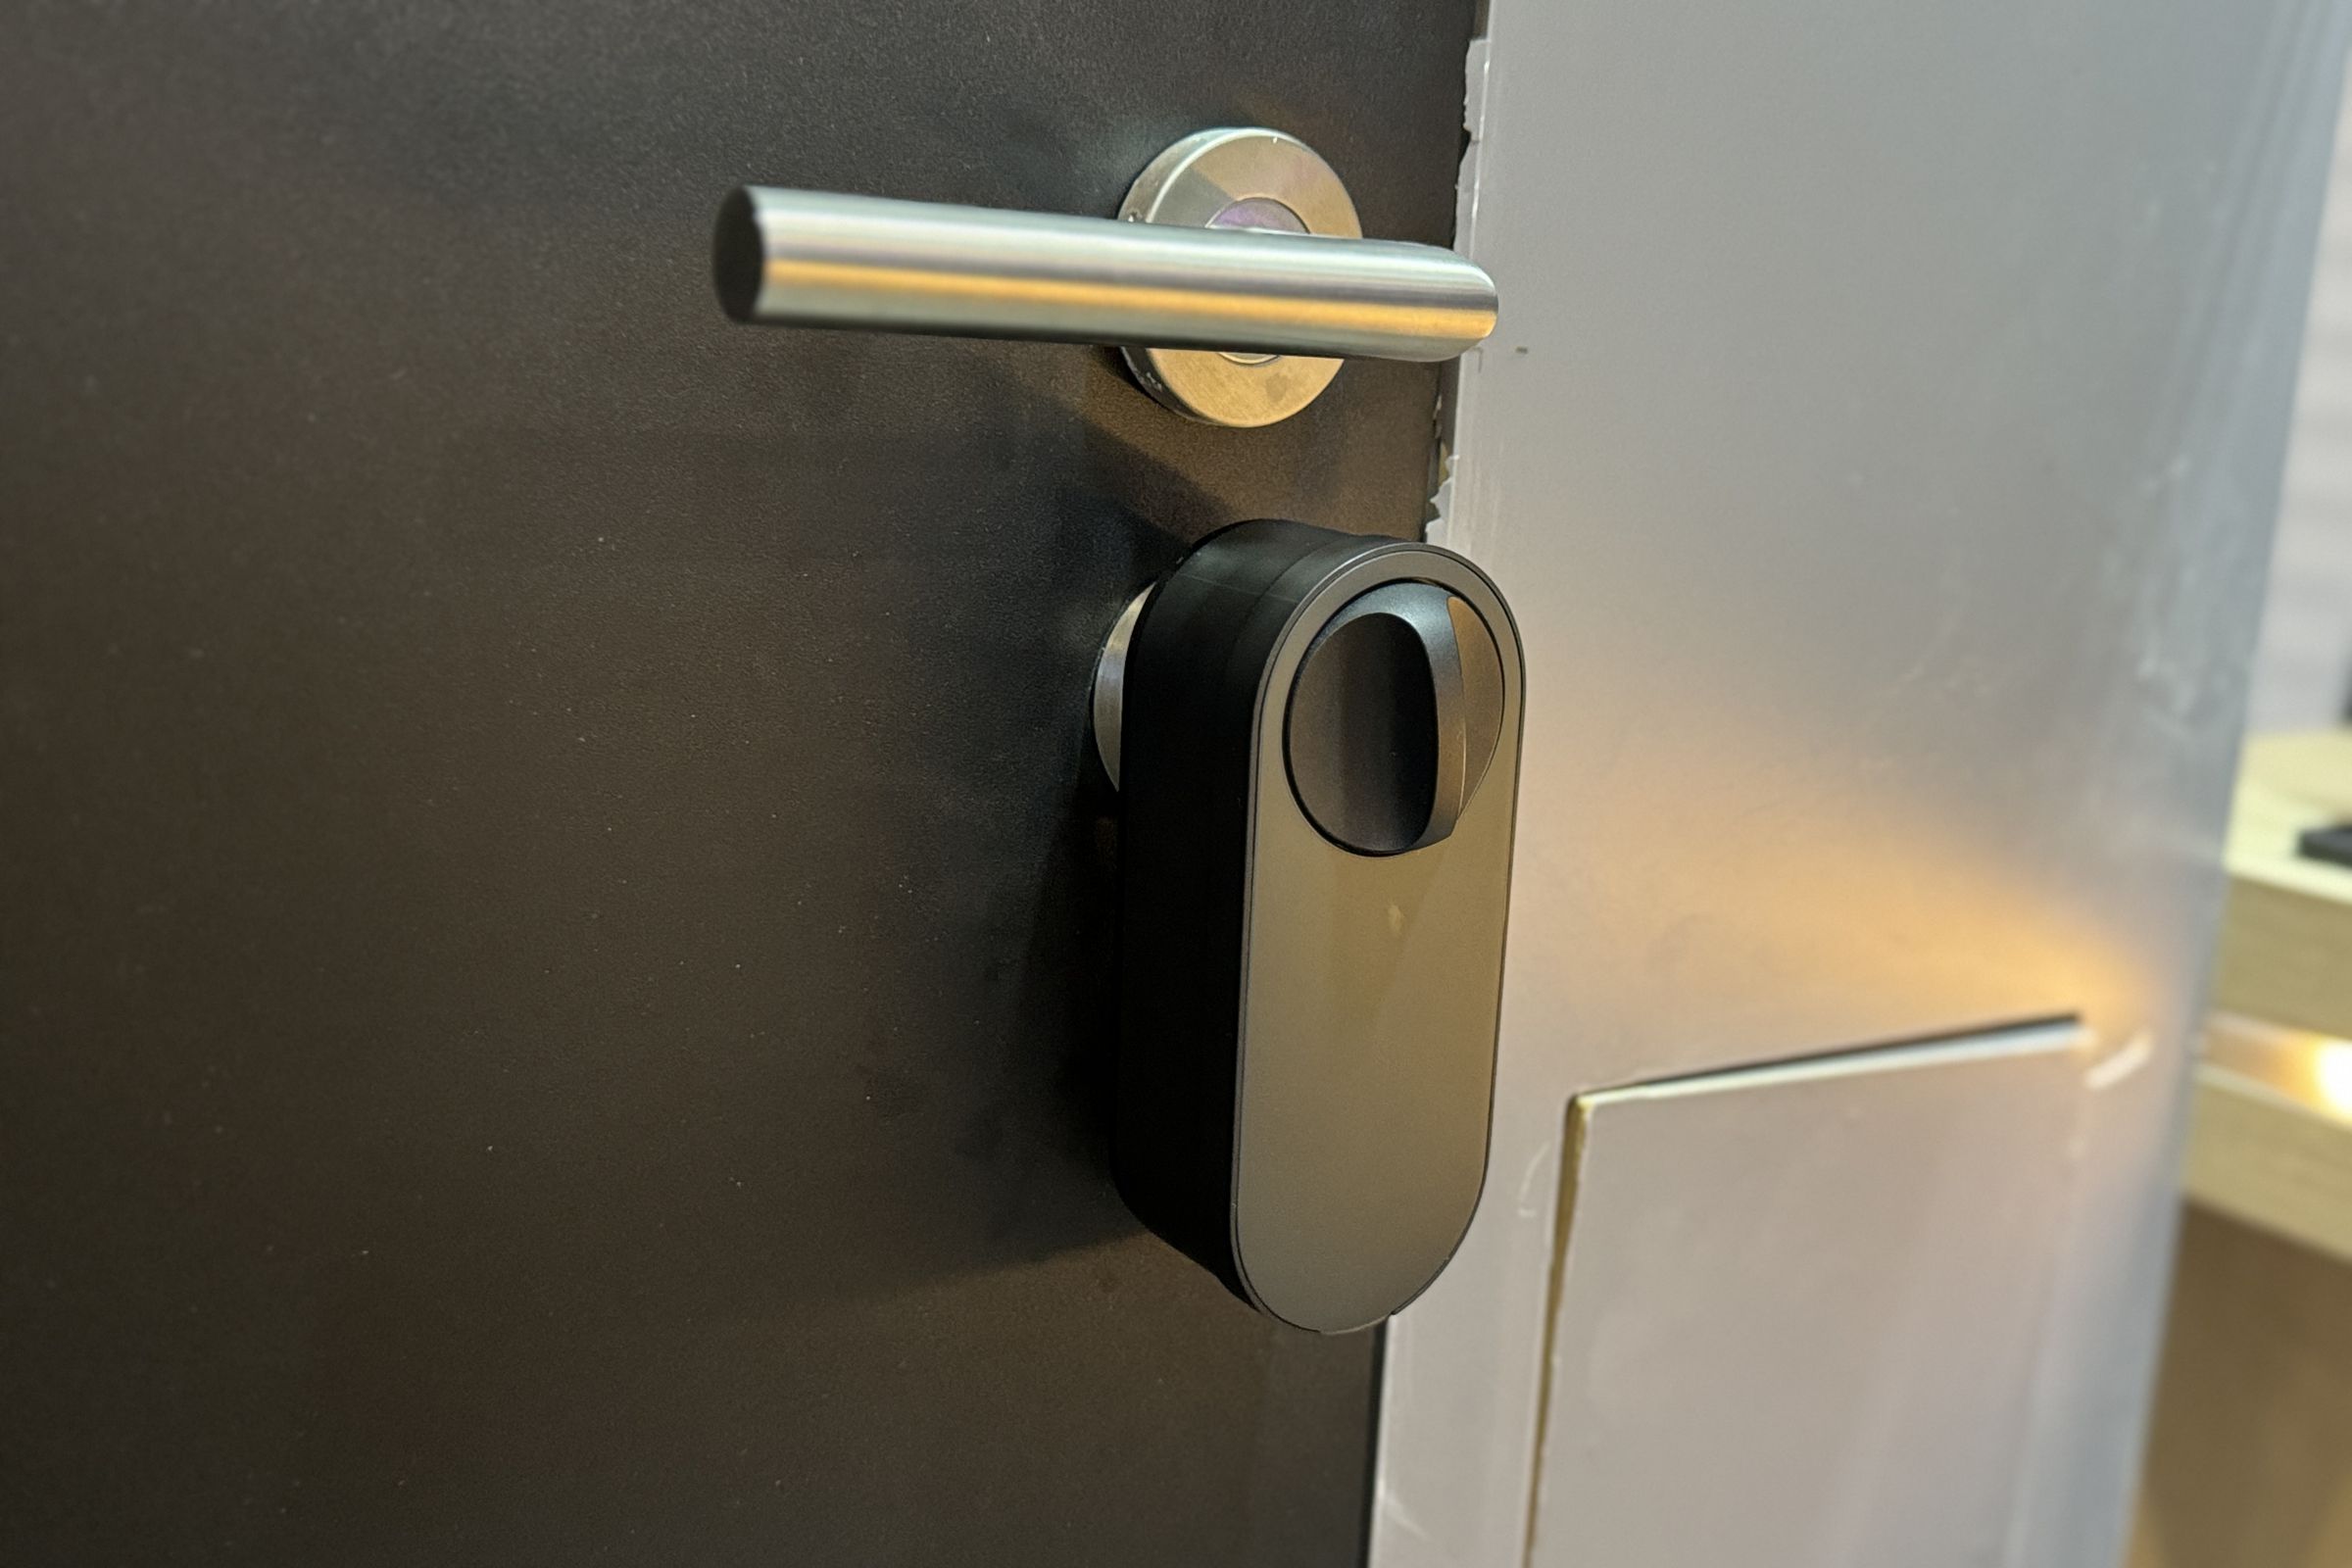 Aqara’s U200 smart lock is a retrofit, Matter-over-Thread door lock, with support for Apple Home Key promised.